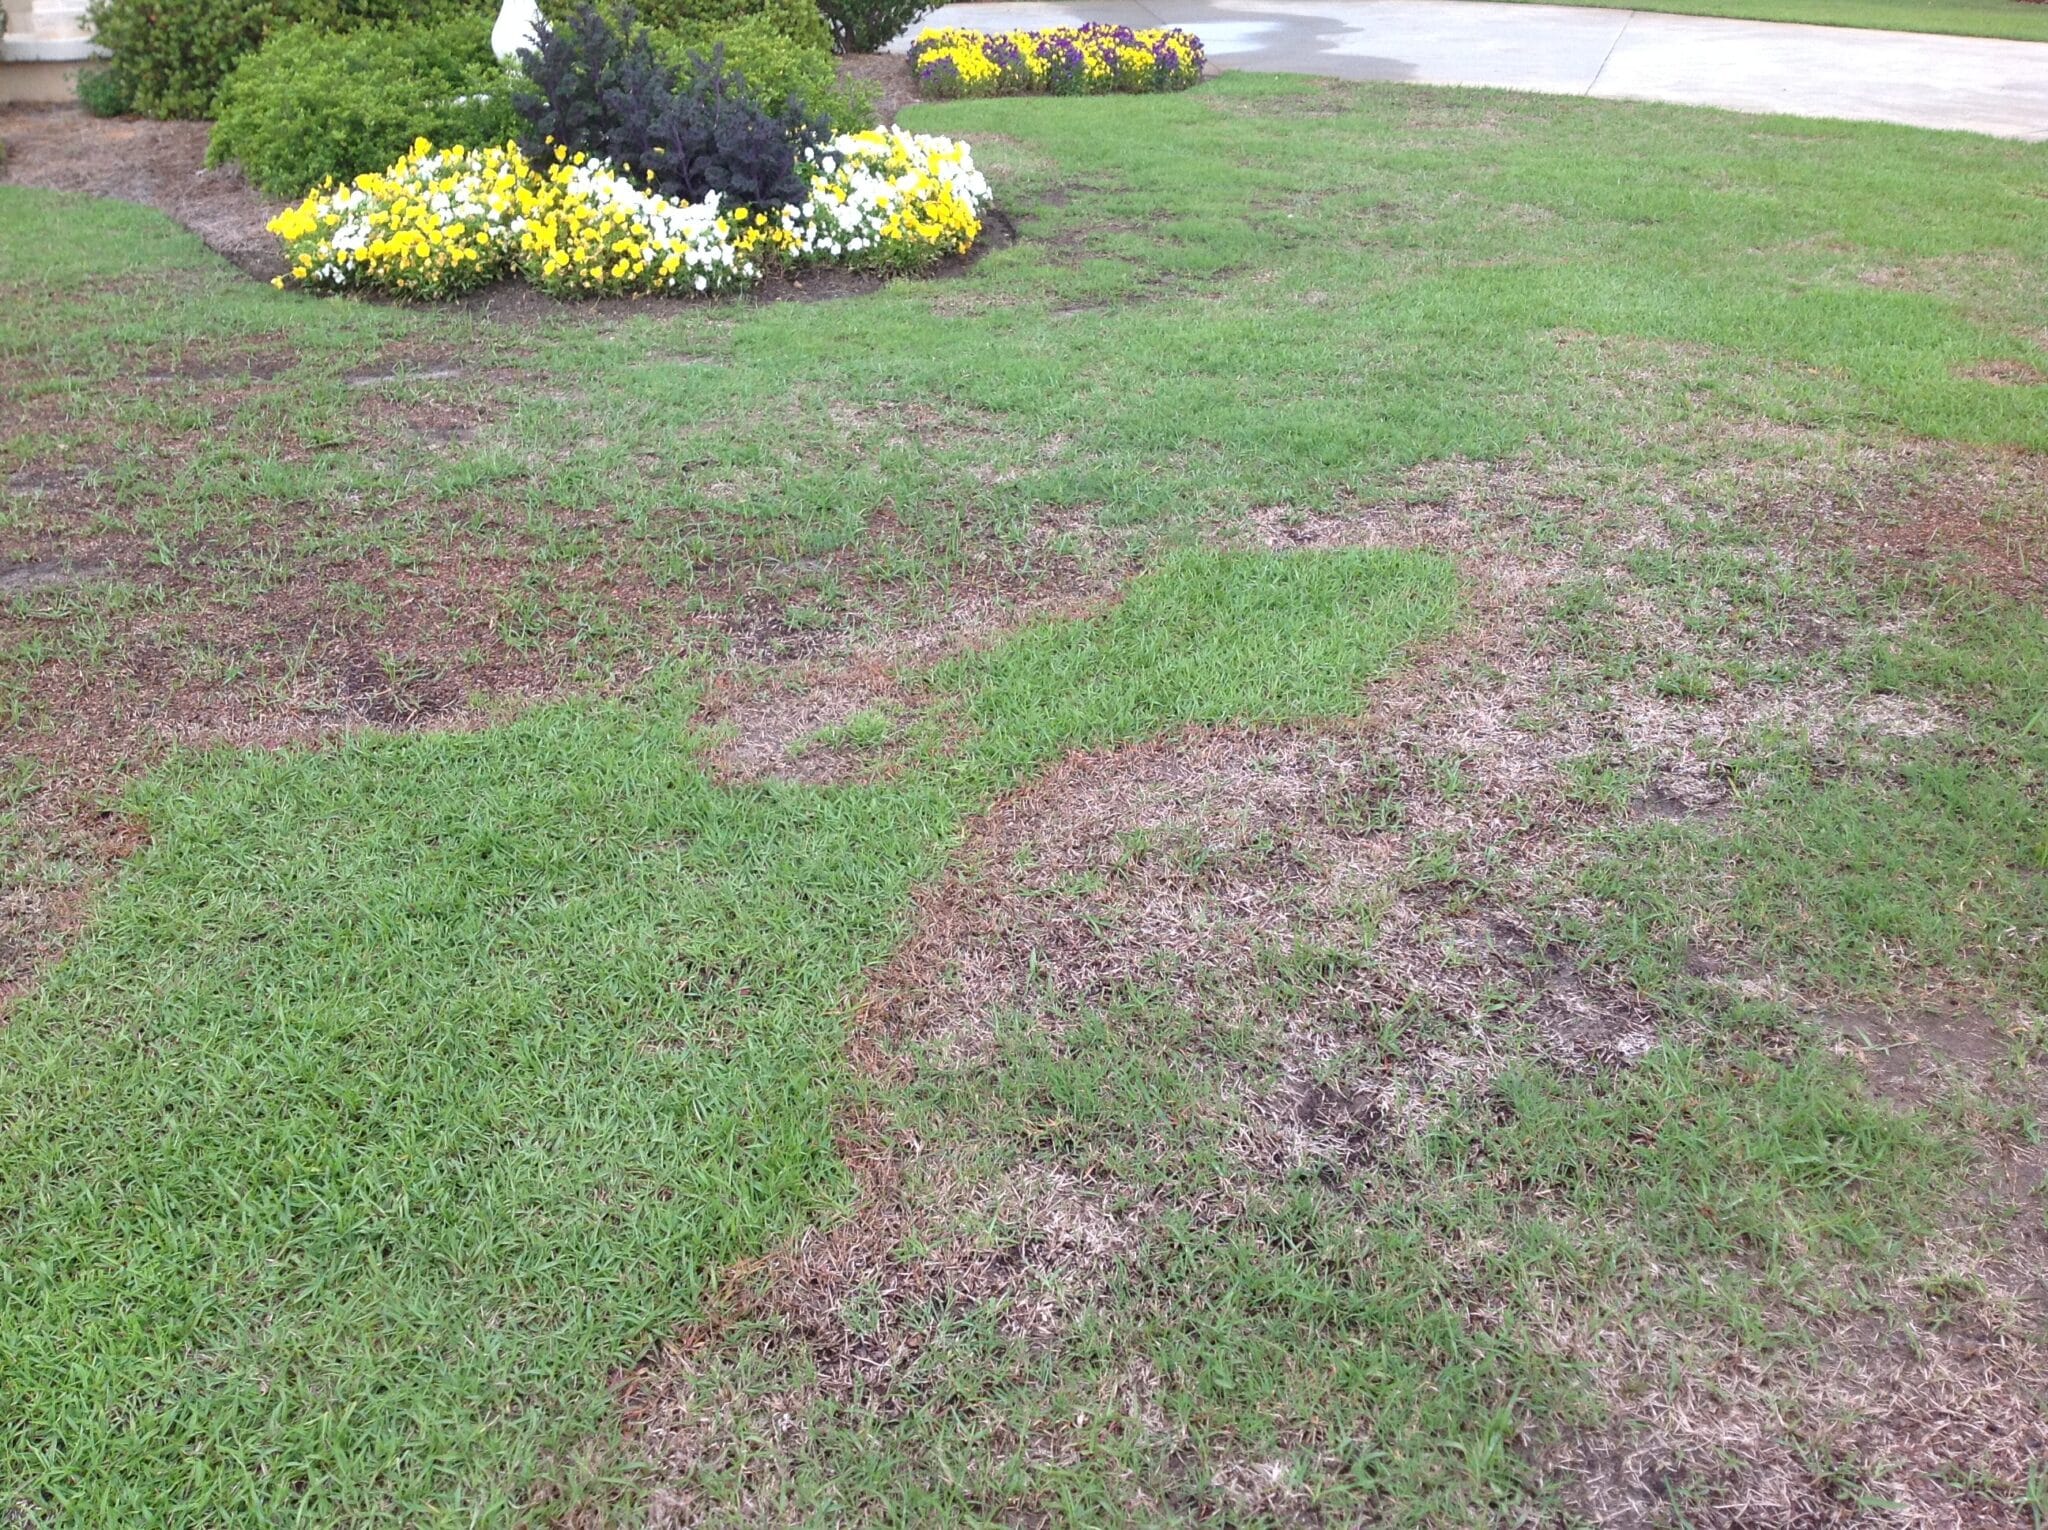 How to keep your lawn disease-free this summer